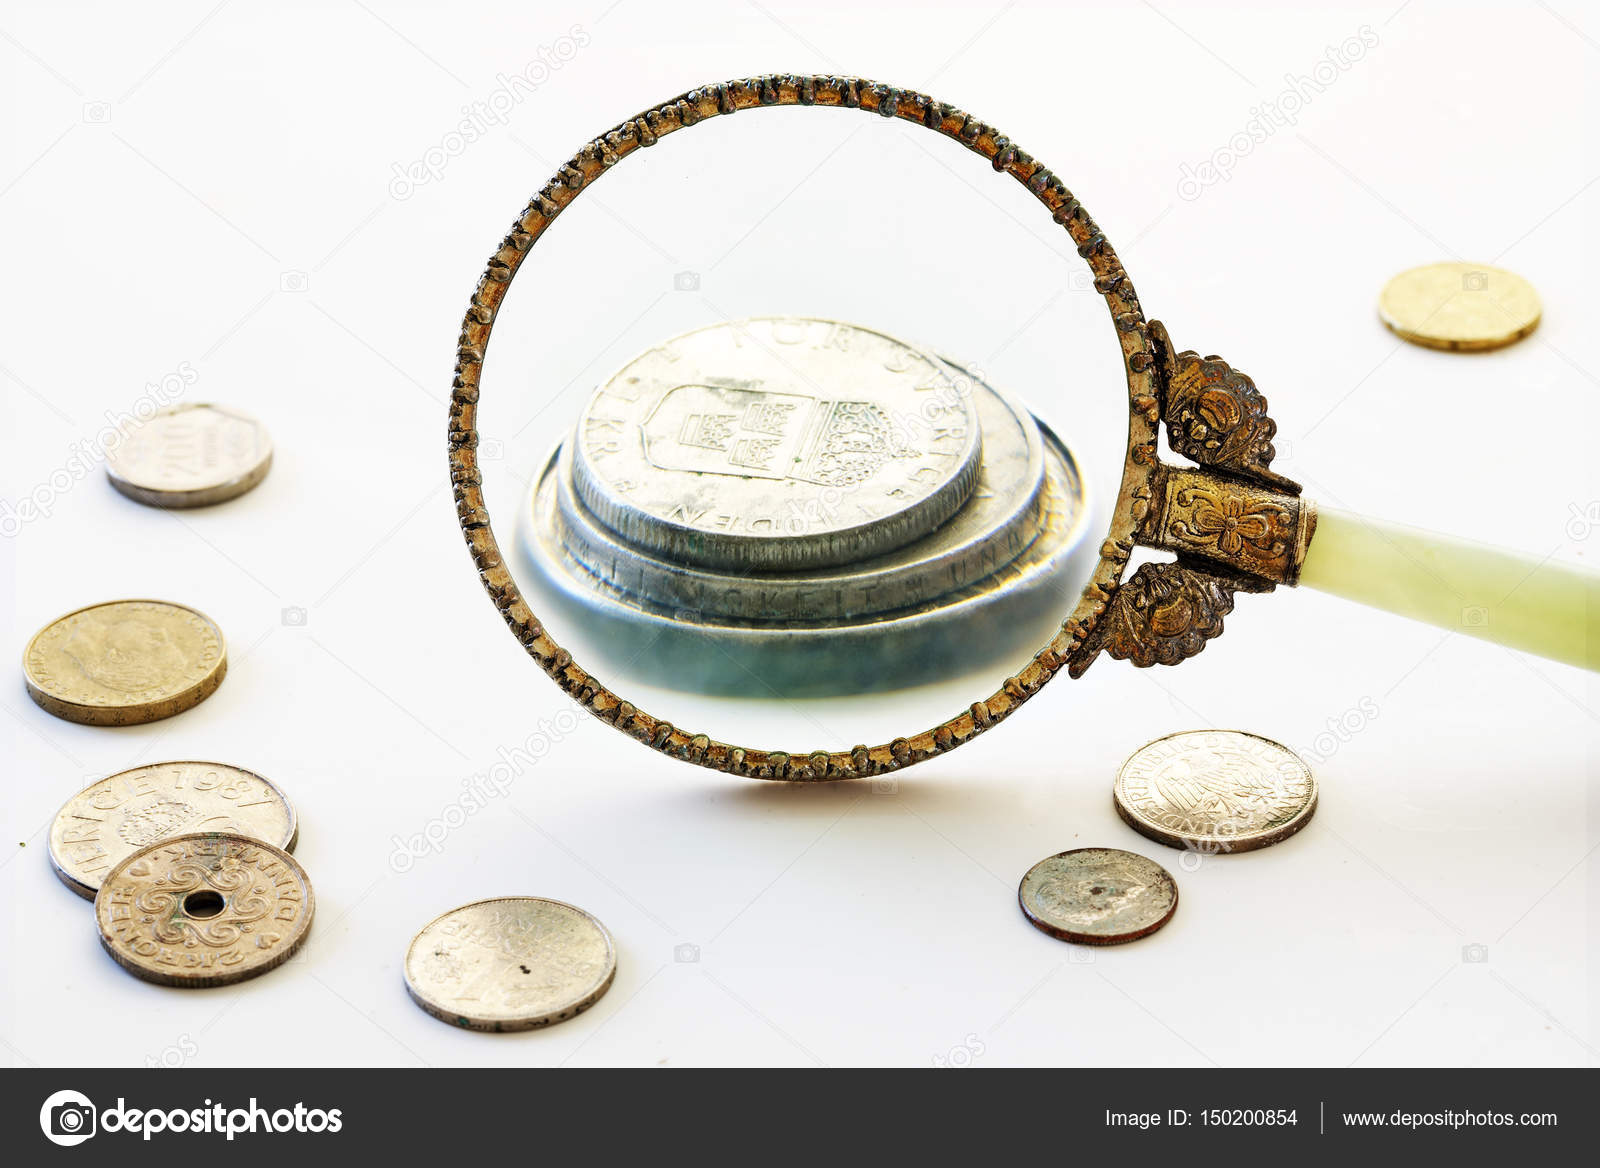 Capital increase, magnifying glass enlarge a few coins, bright